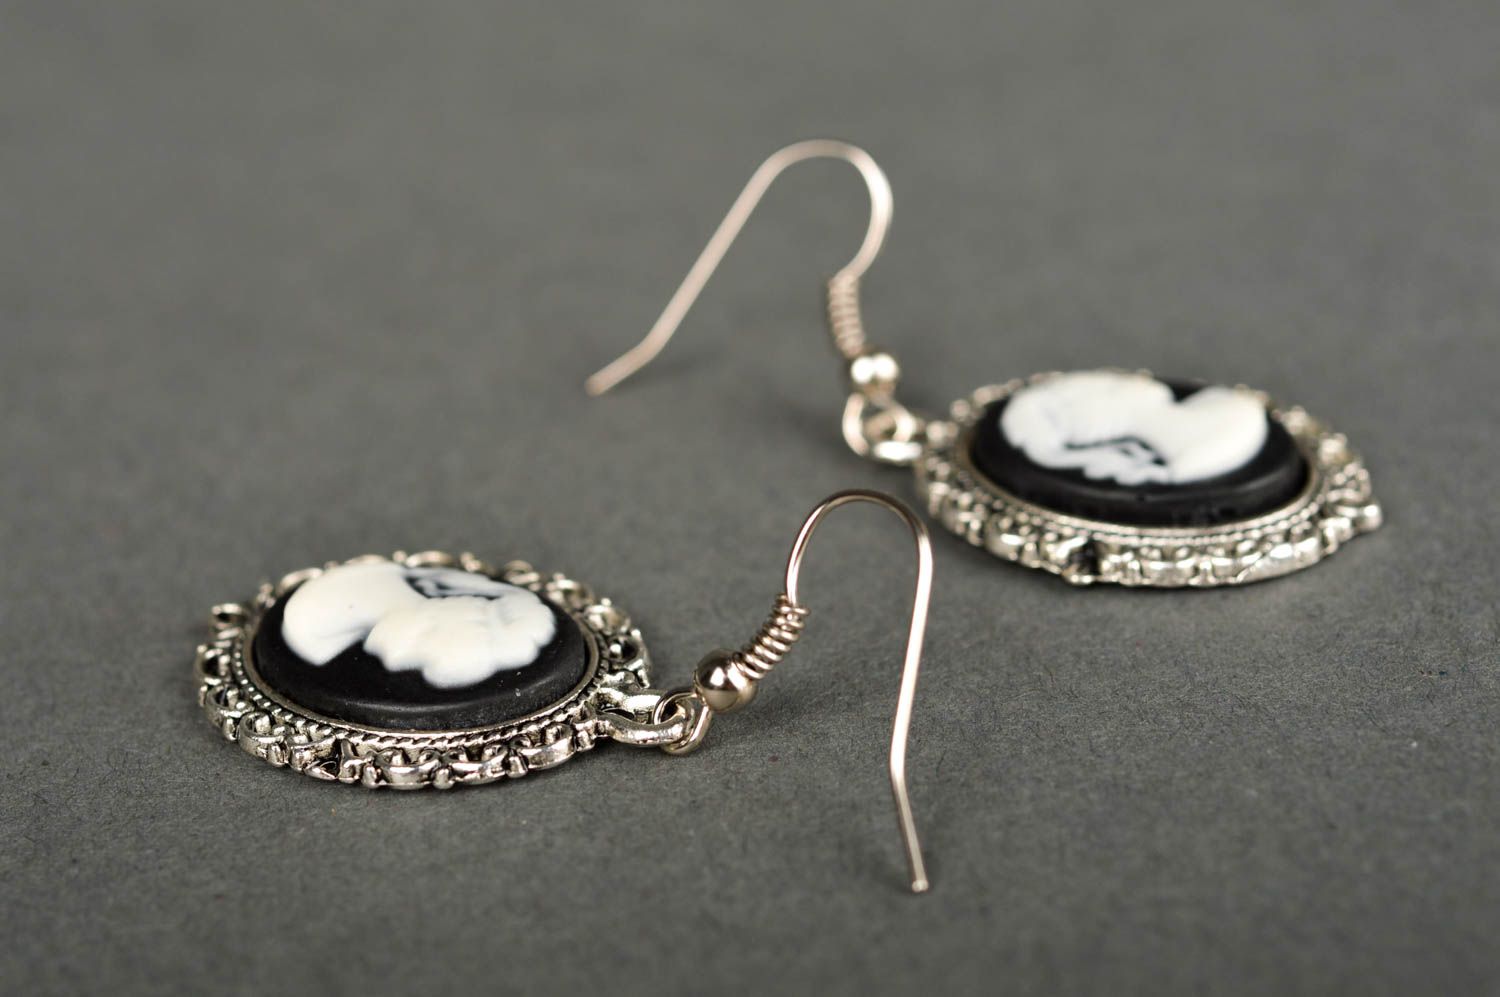 Handmade earrings with cameo, handmade bijouterie accessory for women great gift photo 4